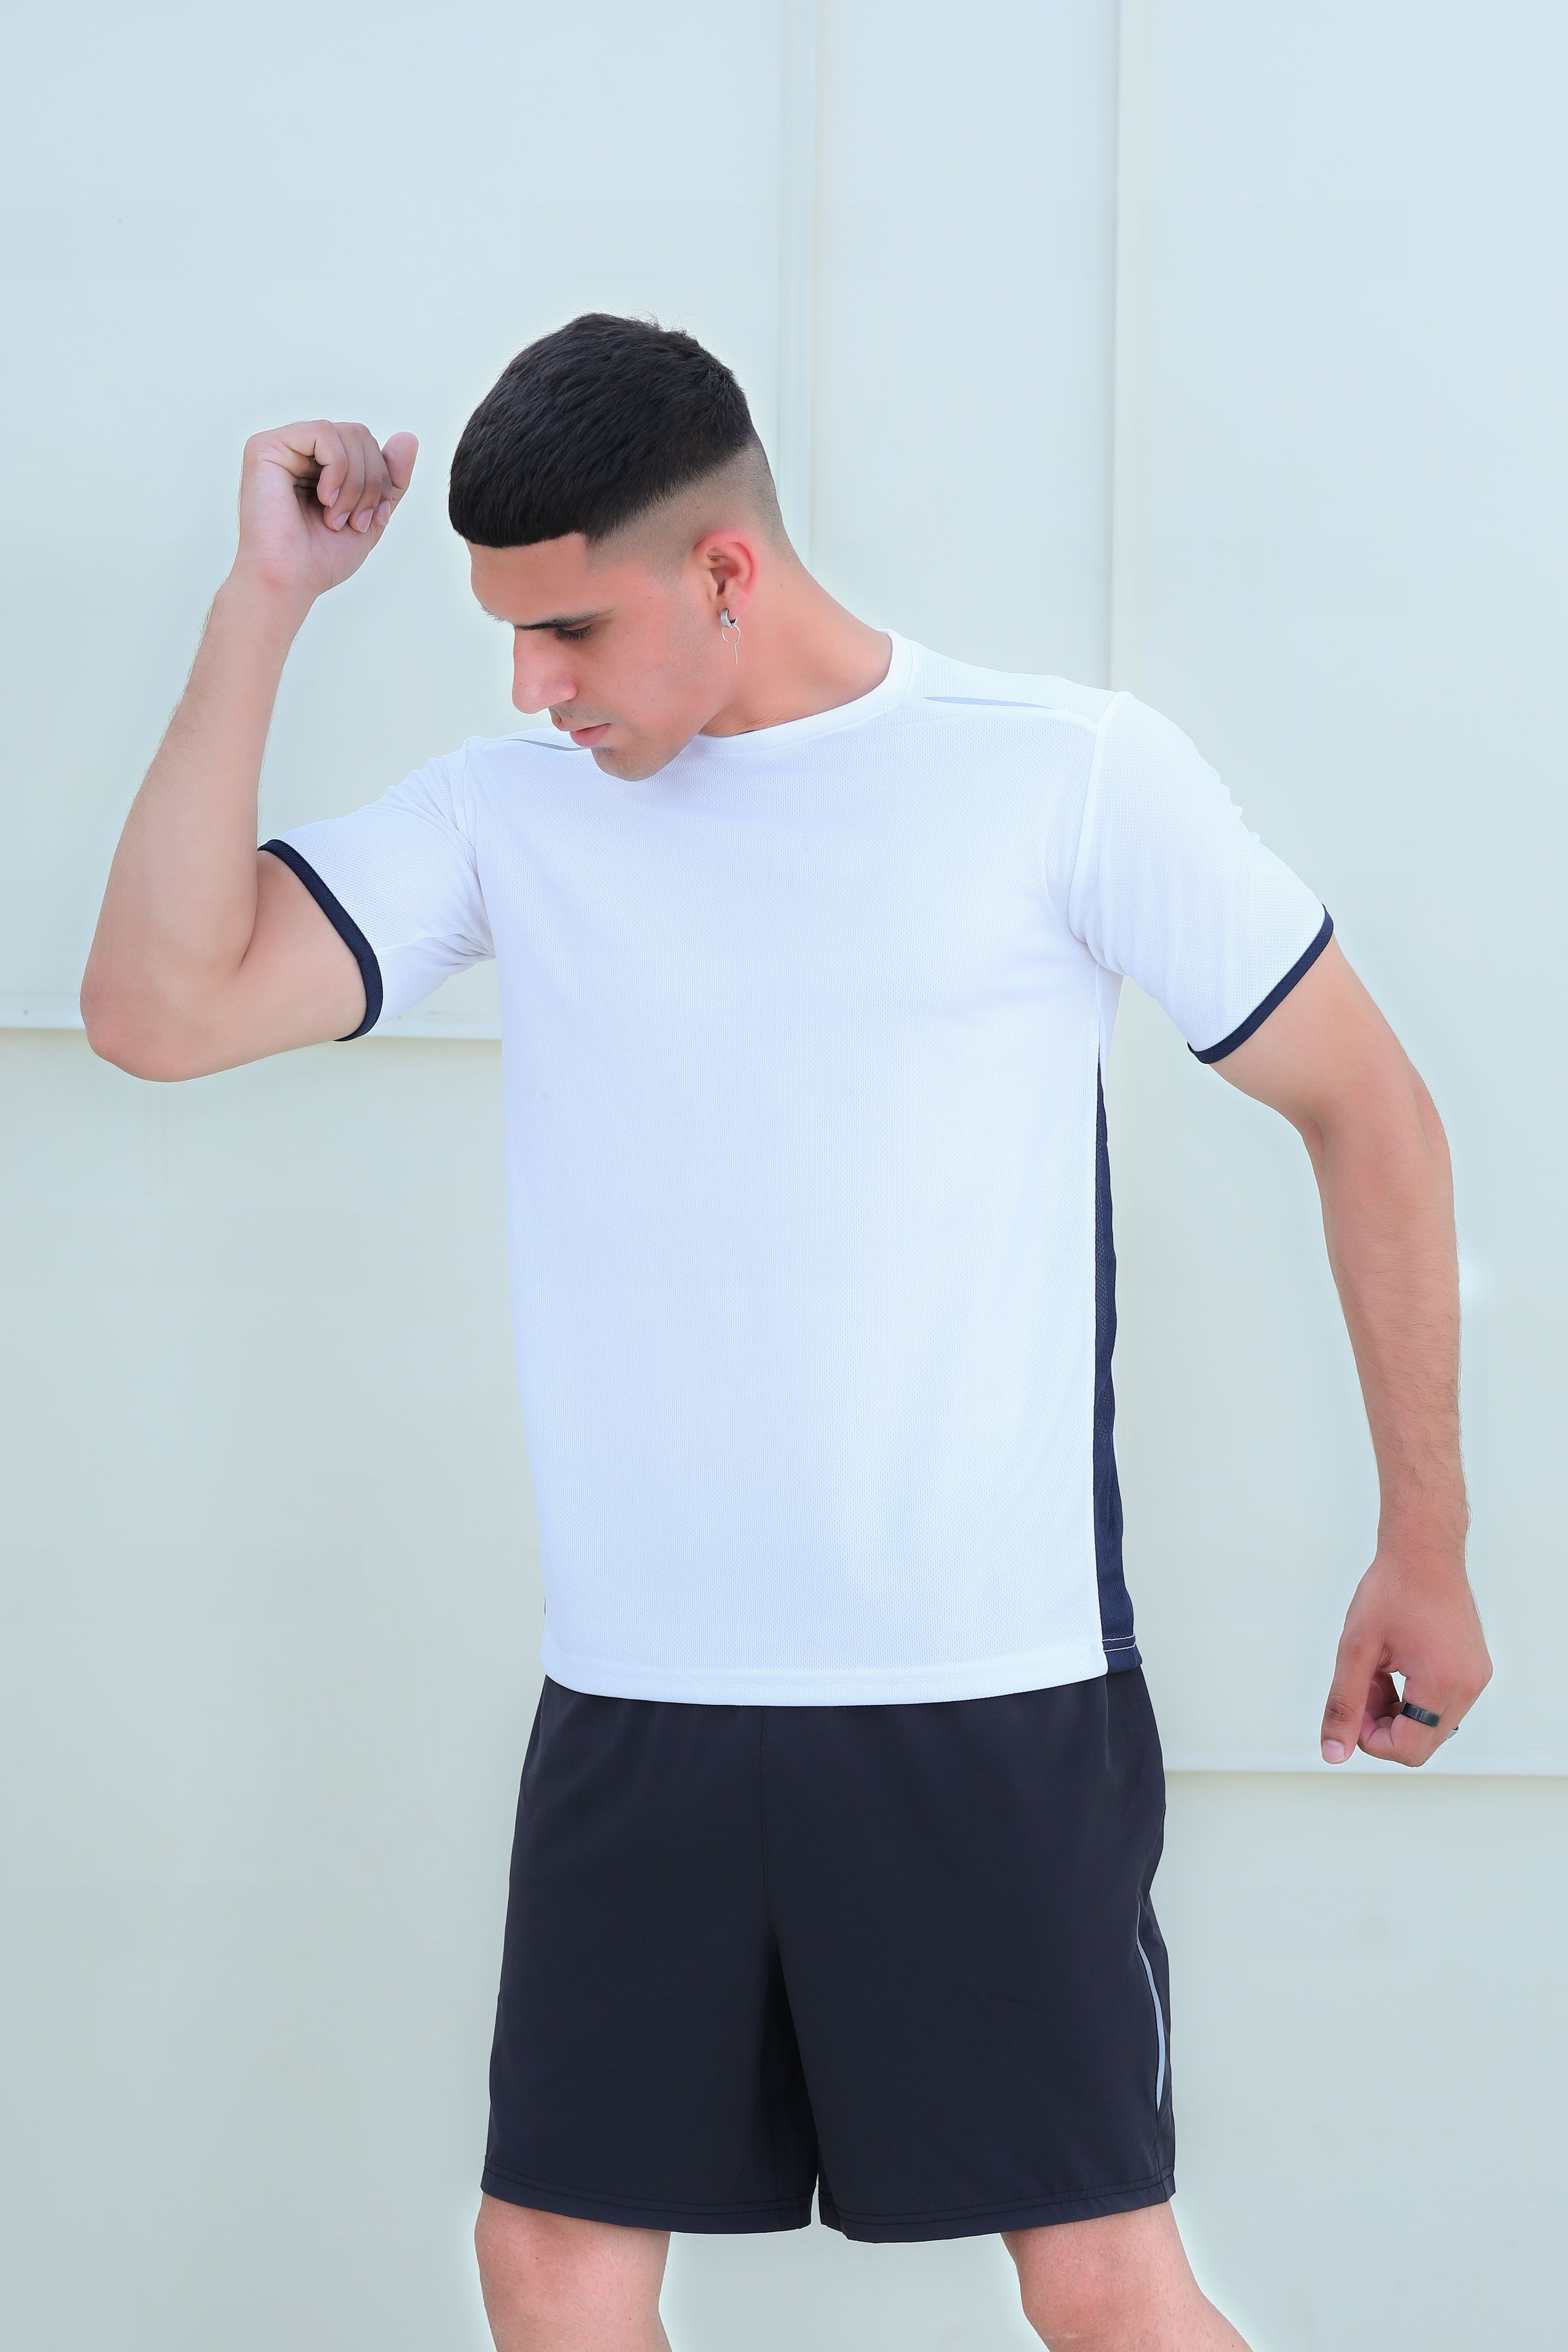 Banner Round Neck Dry-fit Tees for Men-MTST-0066-White Navy